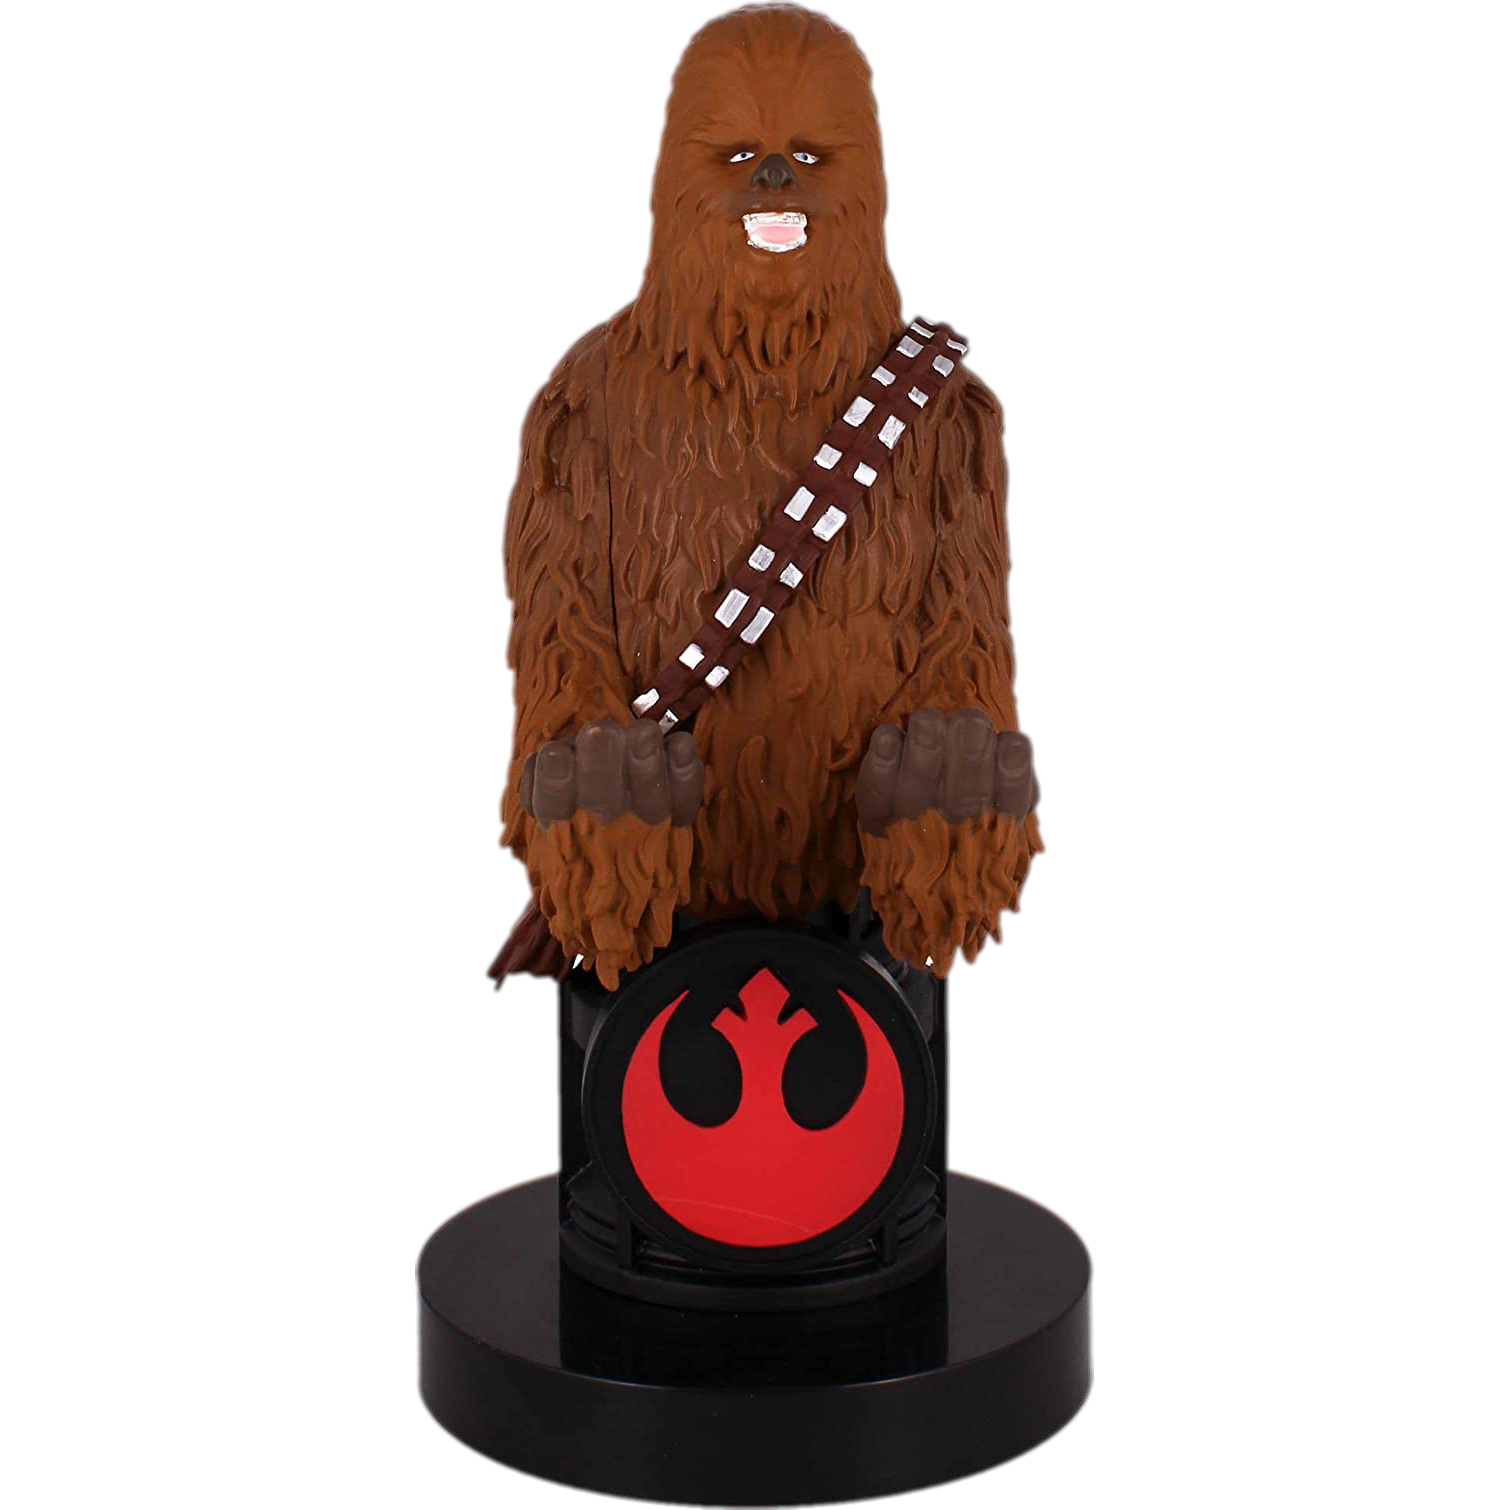 Cable_20Guy_20Chewbacca_20Device_20Holder_1c22cb43-6f92-4f1d-90f4-0bb66743259a